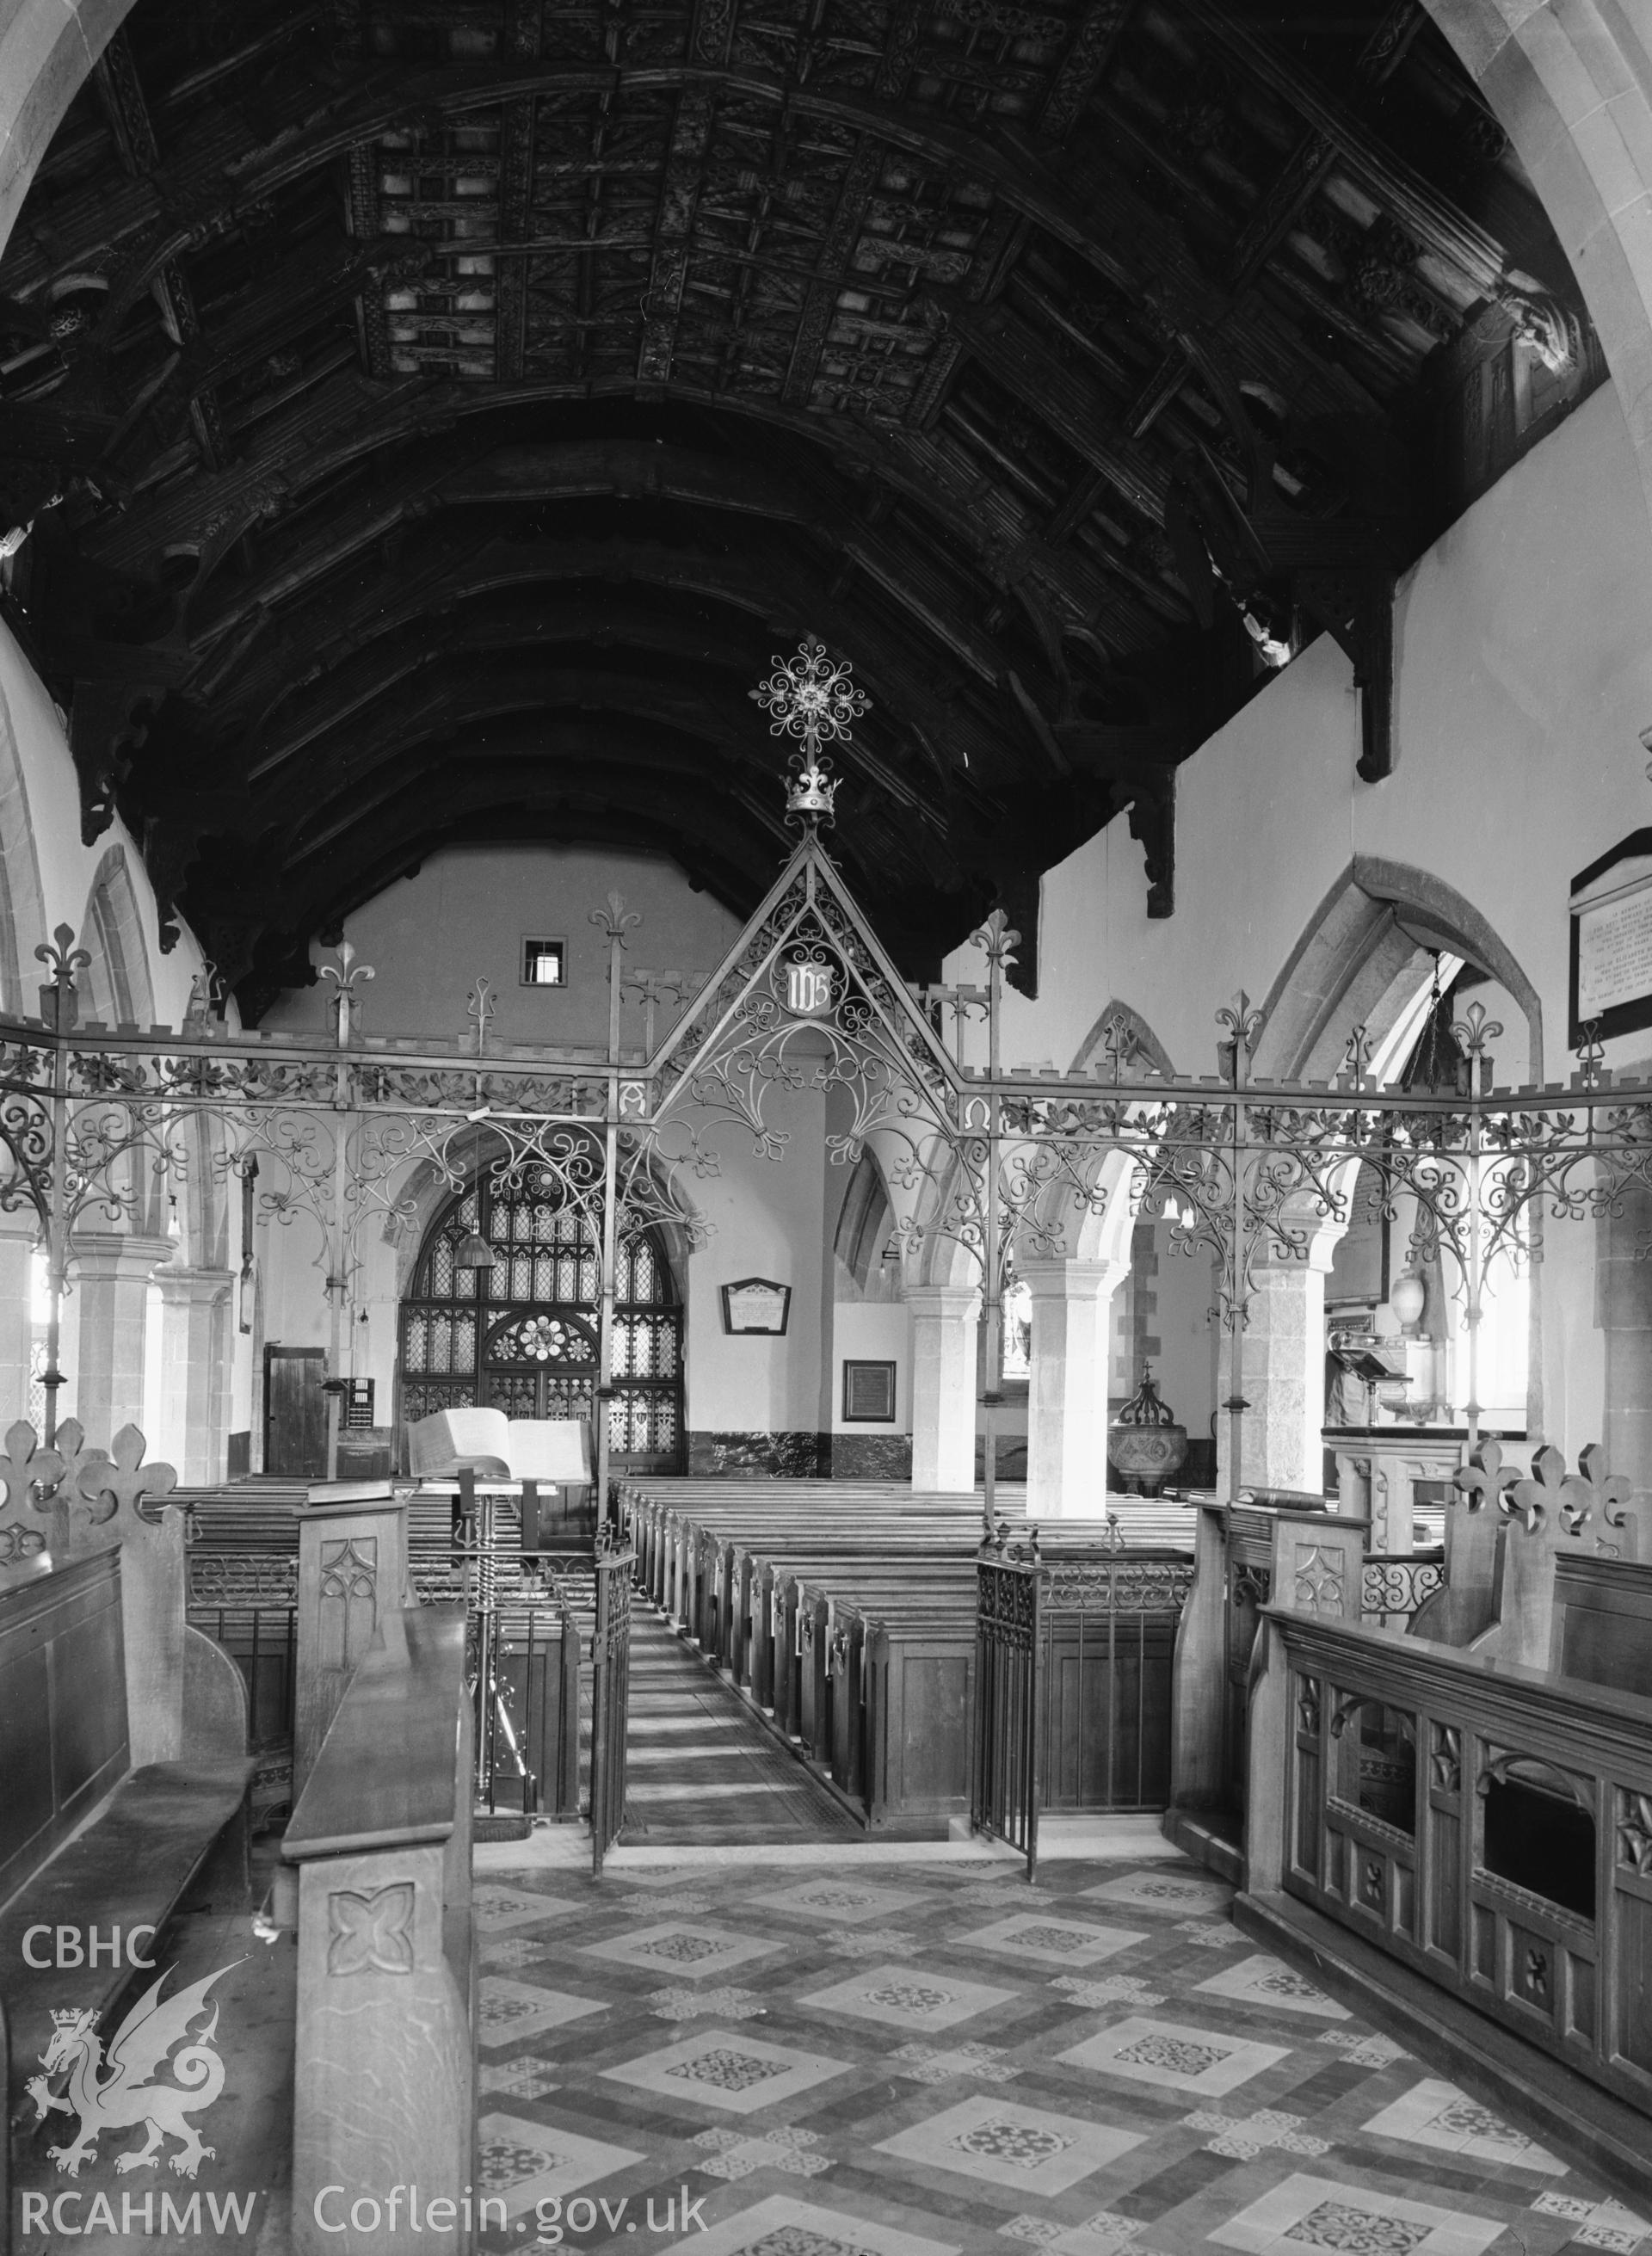 Interior: looking from the chancel